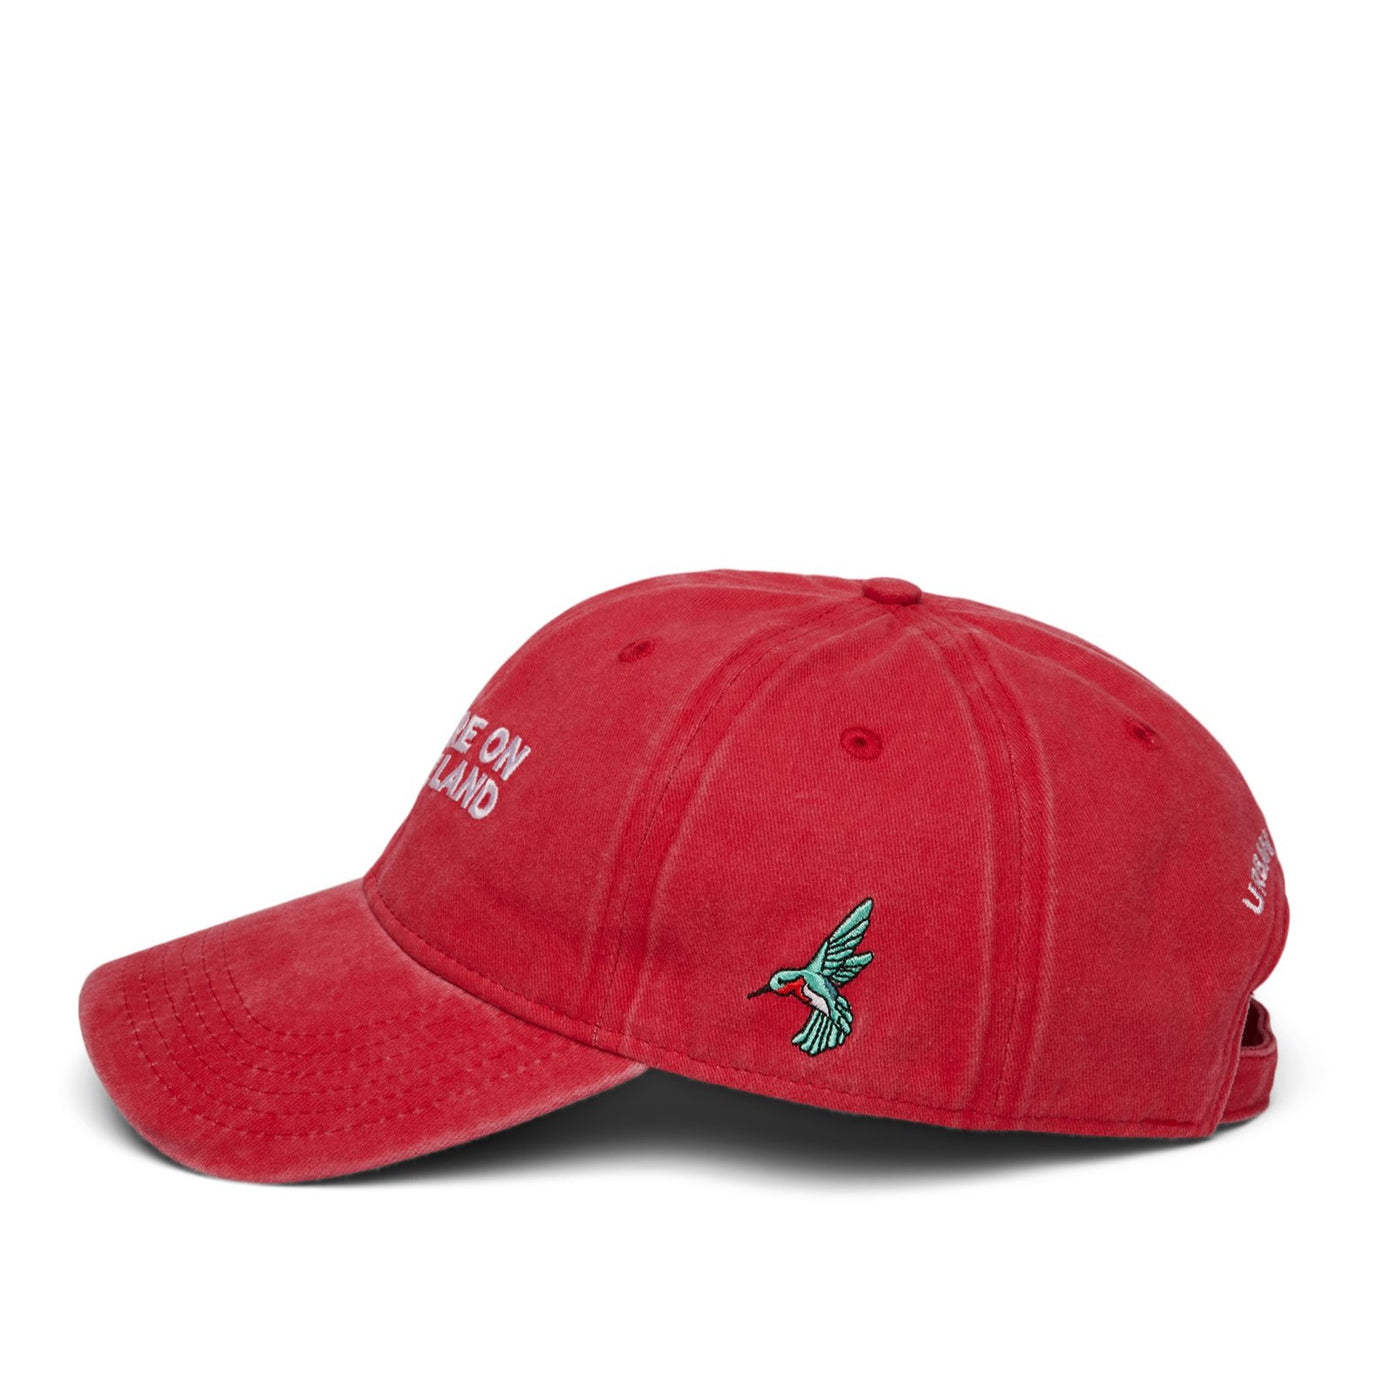 'YOU ARE ON NATIVE LAND' DAD CAP - RED